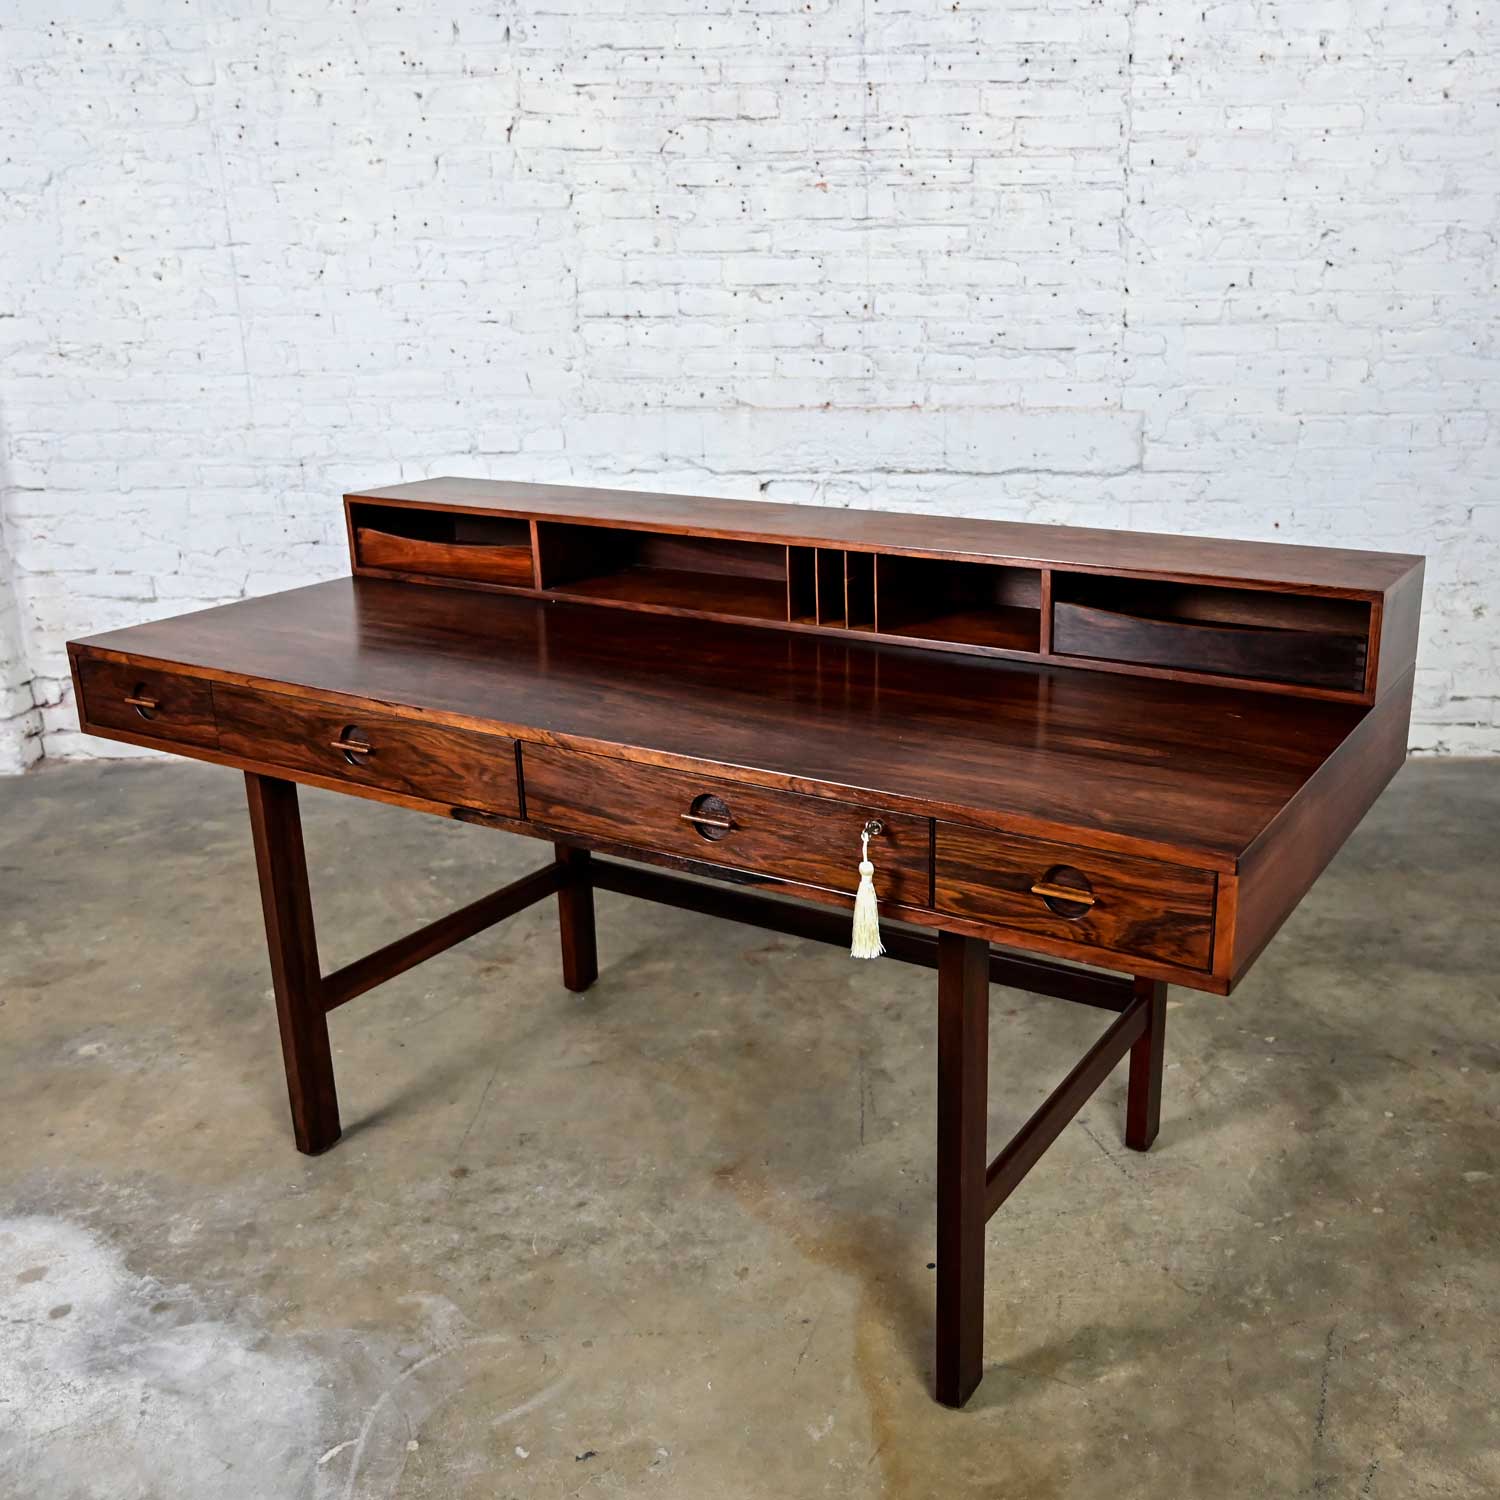 Phenomenal vintage Scandinavian Modern rosewood flip top executive partners desk by Peter Lovig Nielsen for Lovig Dansk Designs. Comprised of a rosewood frame and drawer handles, rounded butterfly hinges, and brass lock mechanism with original key.